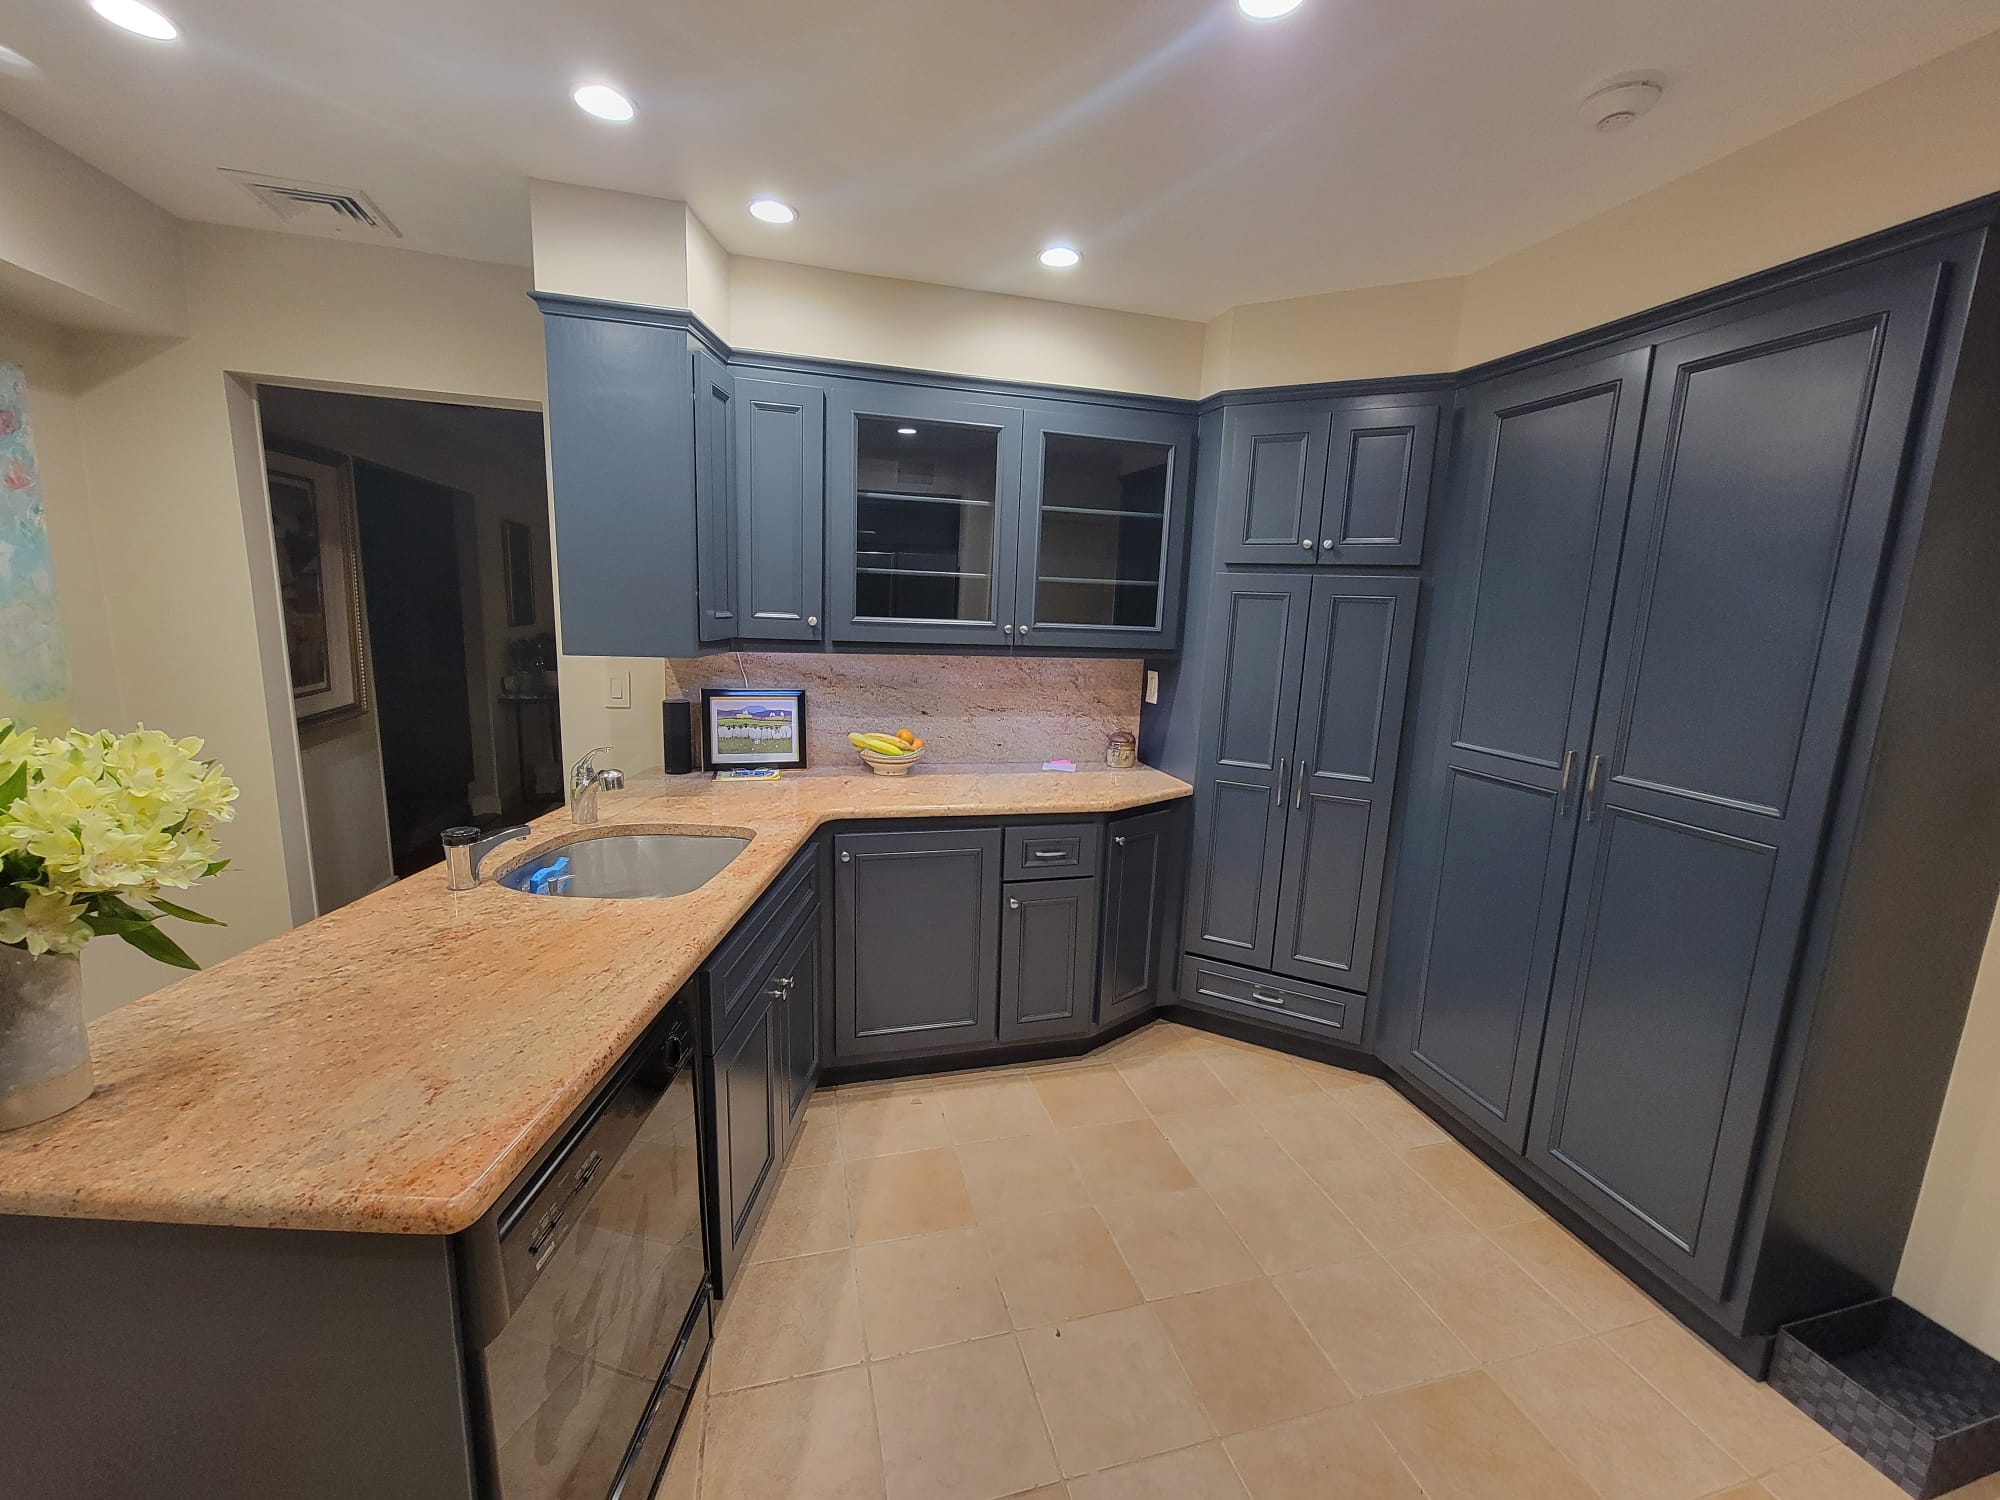 Refrigerator and appliances enclosed in custom modern cabinetry with bright countertops and stainless steel fixtures